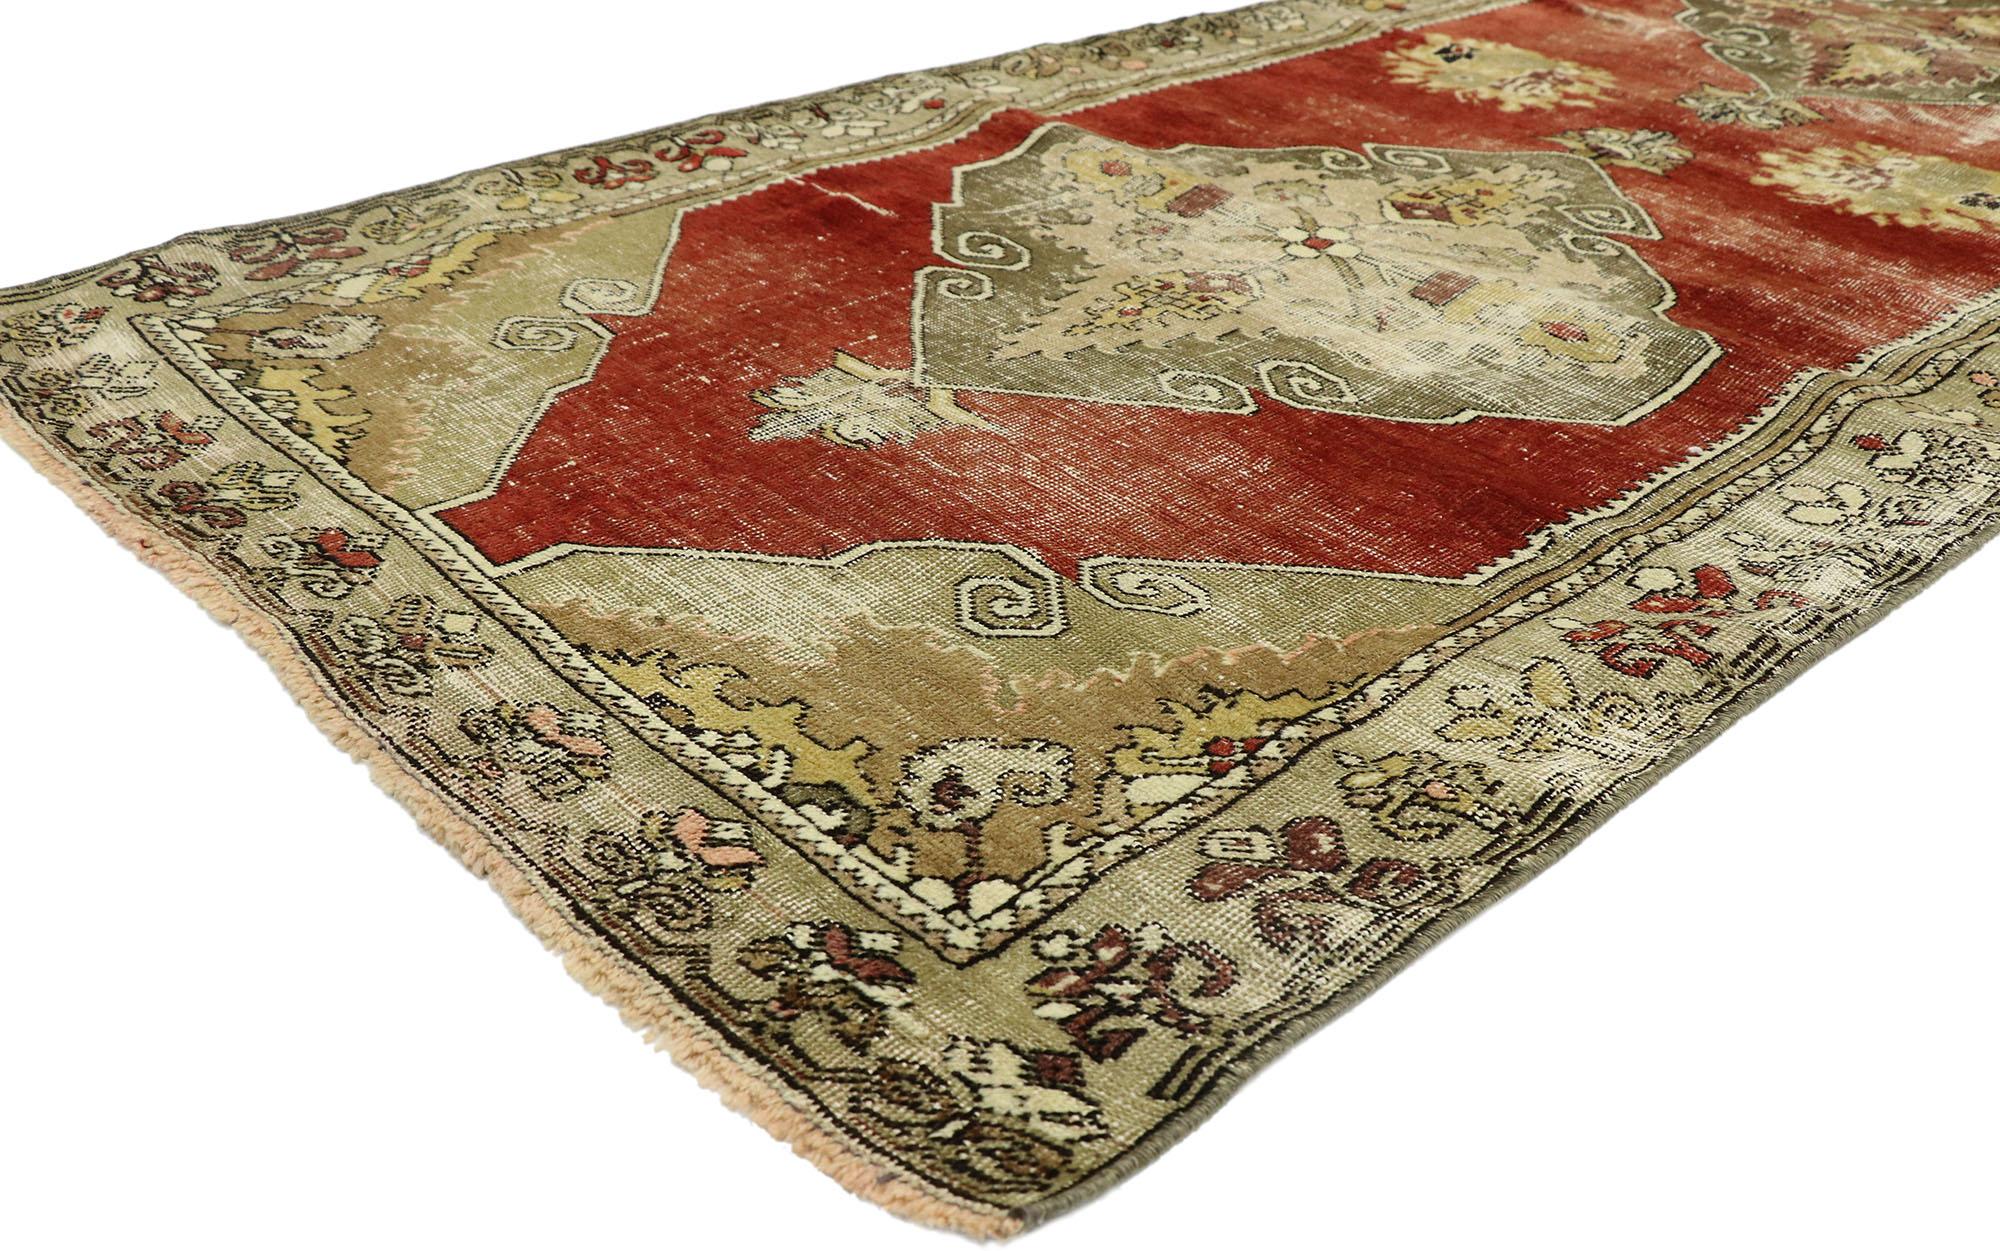 52772, distressed vintage Turkish Oushak runner with rustic lodge style. This hand knotted wool vintage Turkish Oushak runner features three large medallions anchored with palmette pendants spread across an abrashed brick red field dotted with four